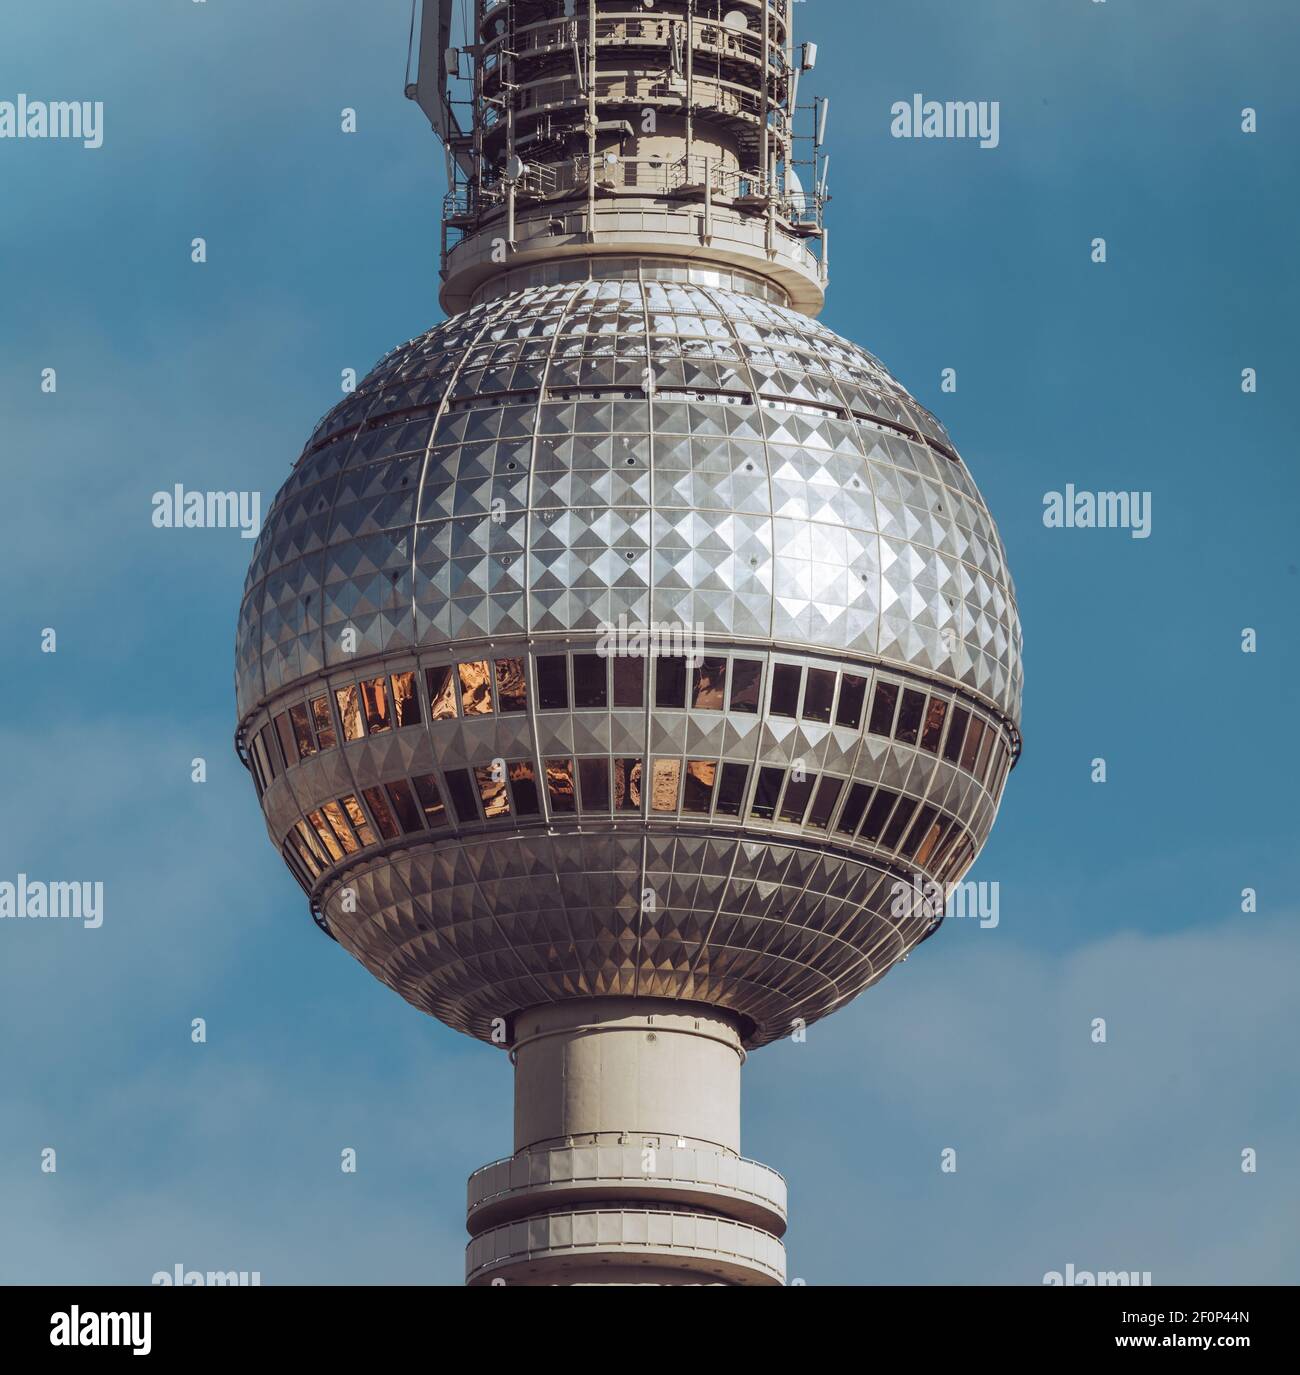 BERLIN, GERMANY - Feb 10, 2021: Aerial view towards snow covered Berlin TV Tower near Alexanderplatz after blizzard. Stock Photo